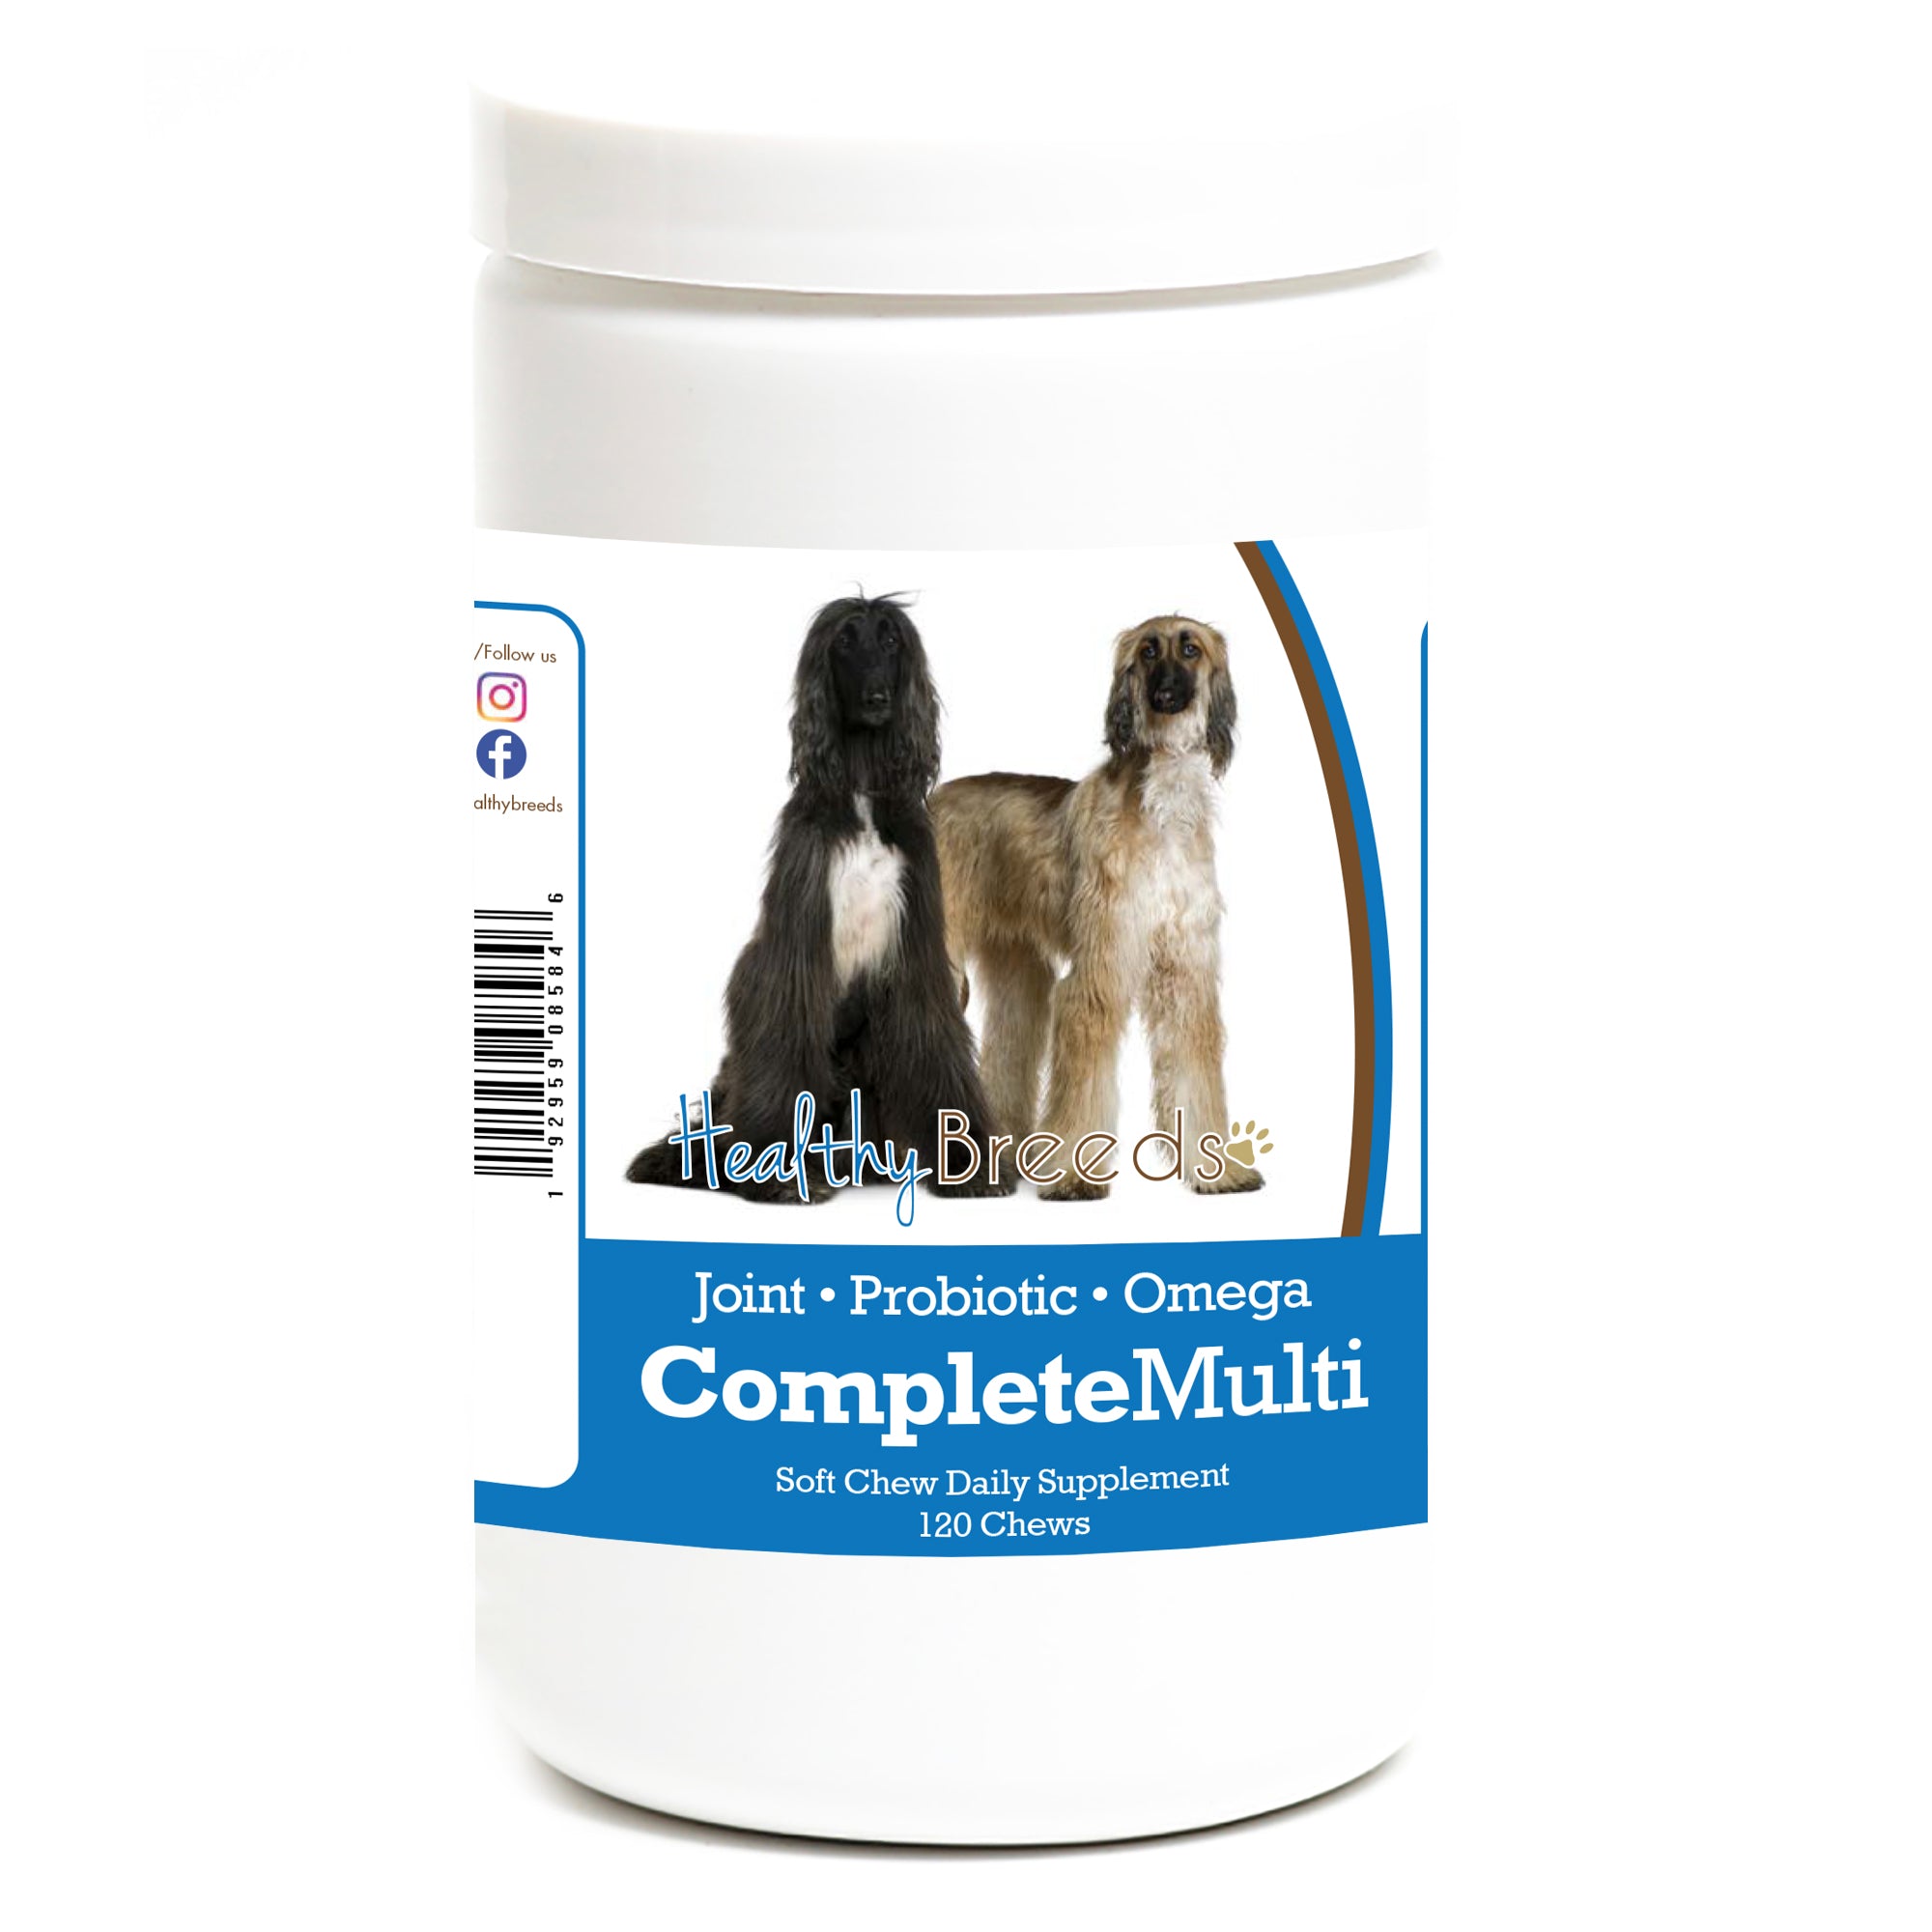 Afghan Hound All In One Multivitamin Soft Chew 120 Count